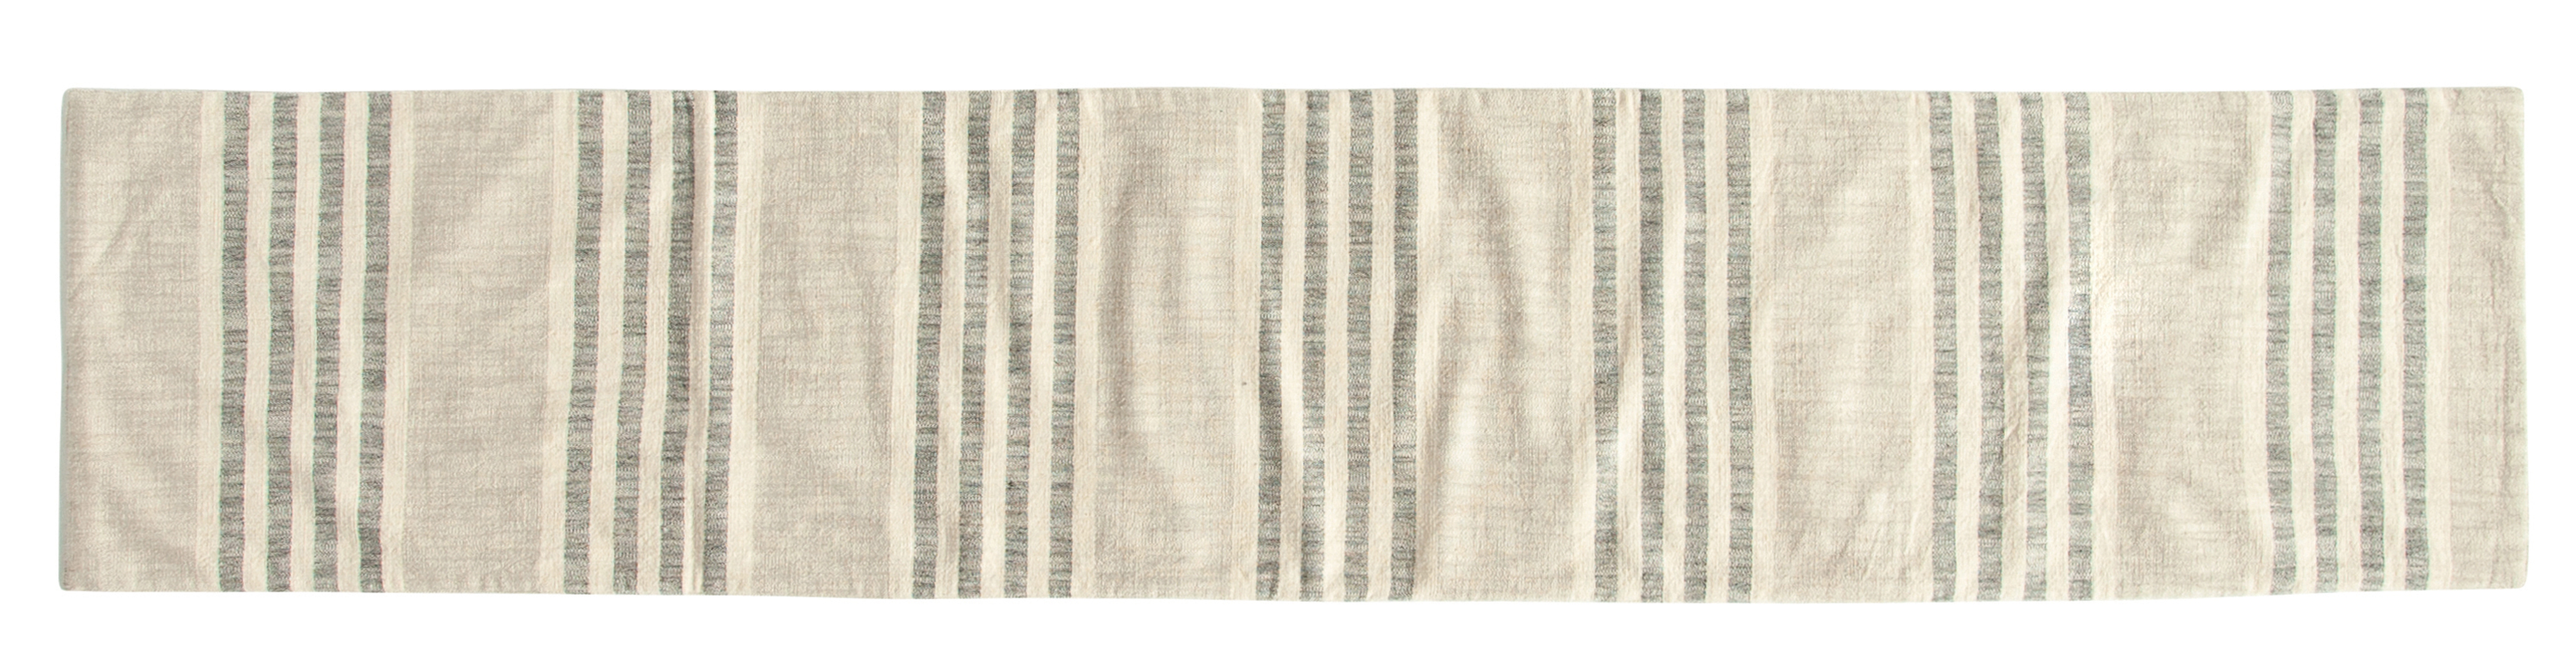 Grey Striped Cotton Woven Table Runner - Nomad Home